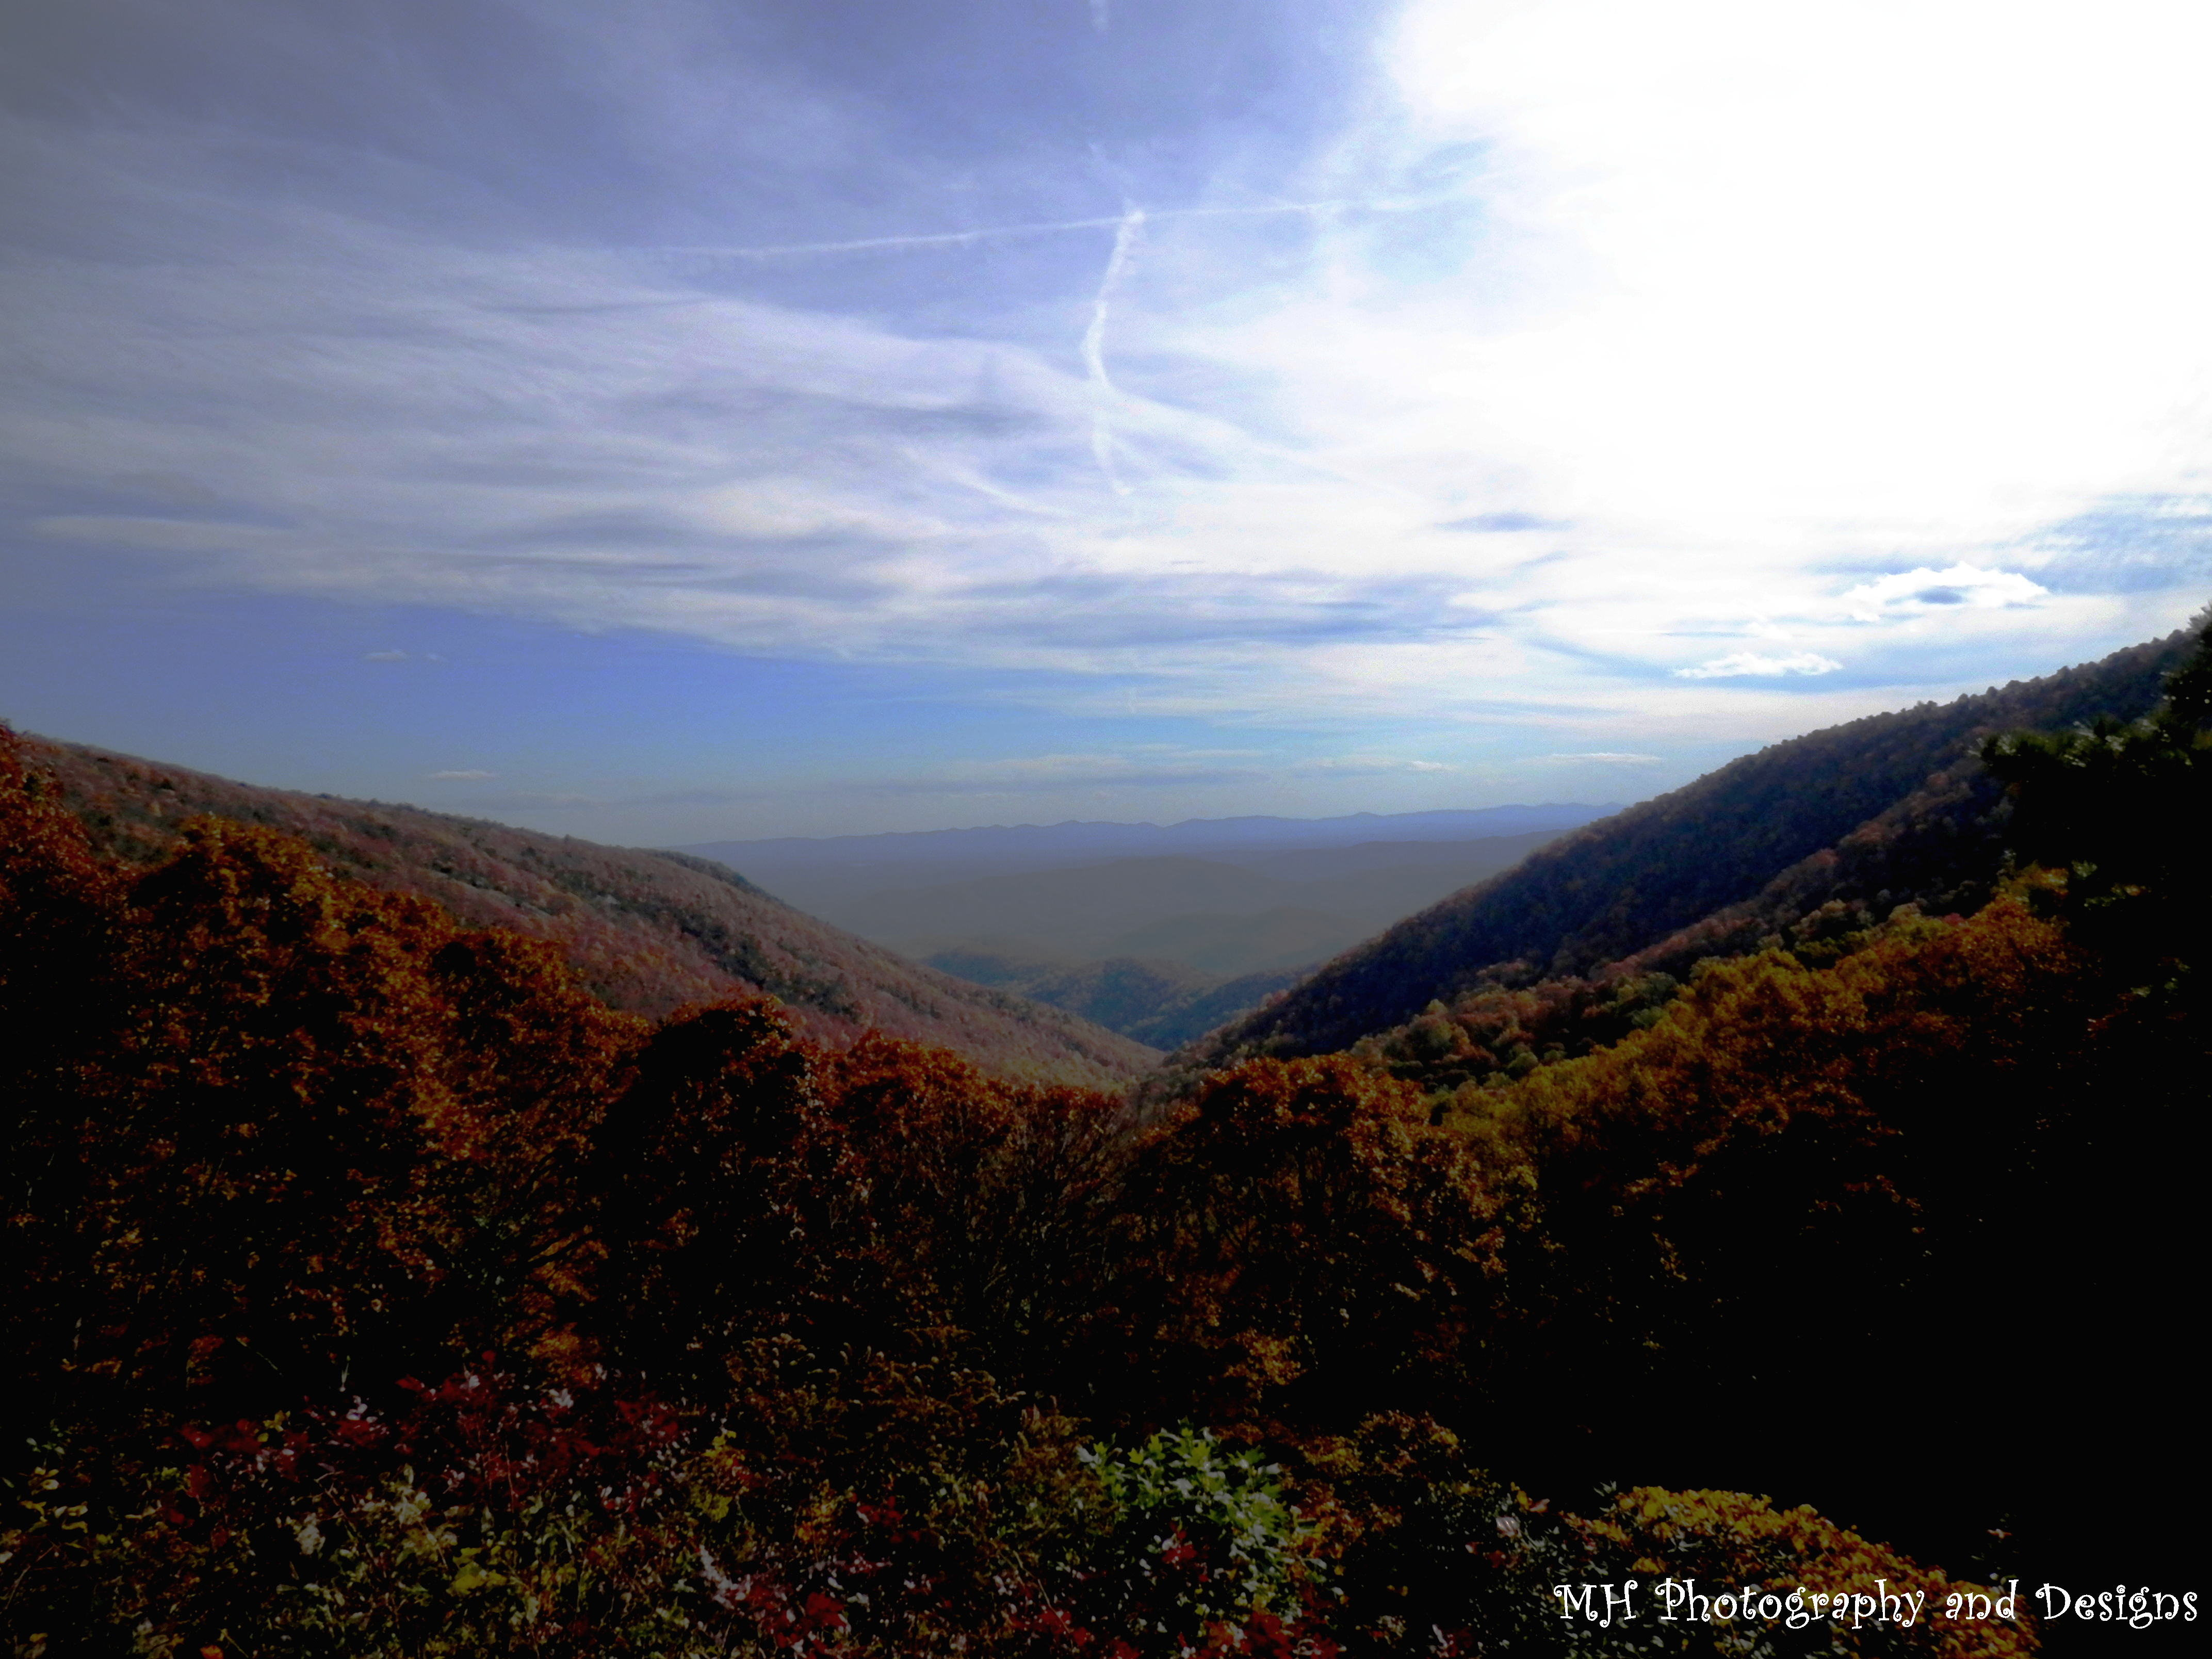 Blue Ridge Parkway, mountain beauty | MH Photography & Designs4288 x 3216